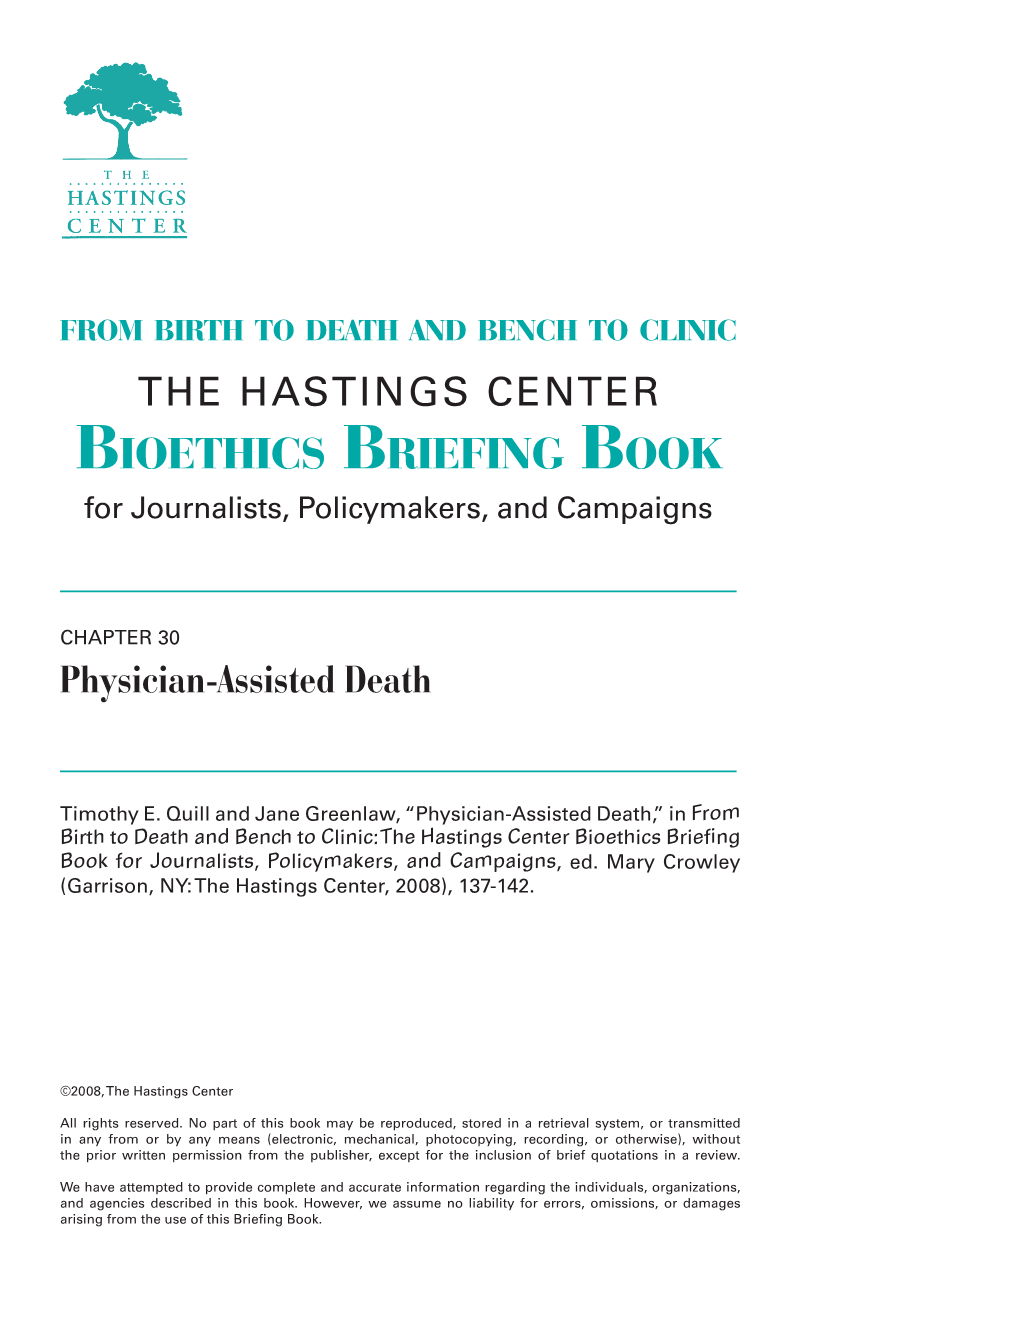 Bioethics Briefing Book for Journalists, Policymakers, and Campaigns, Ed